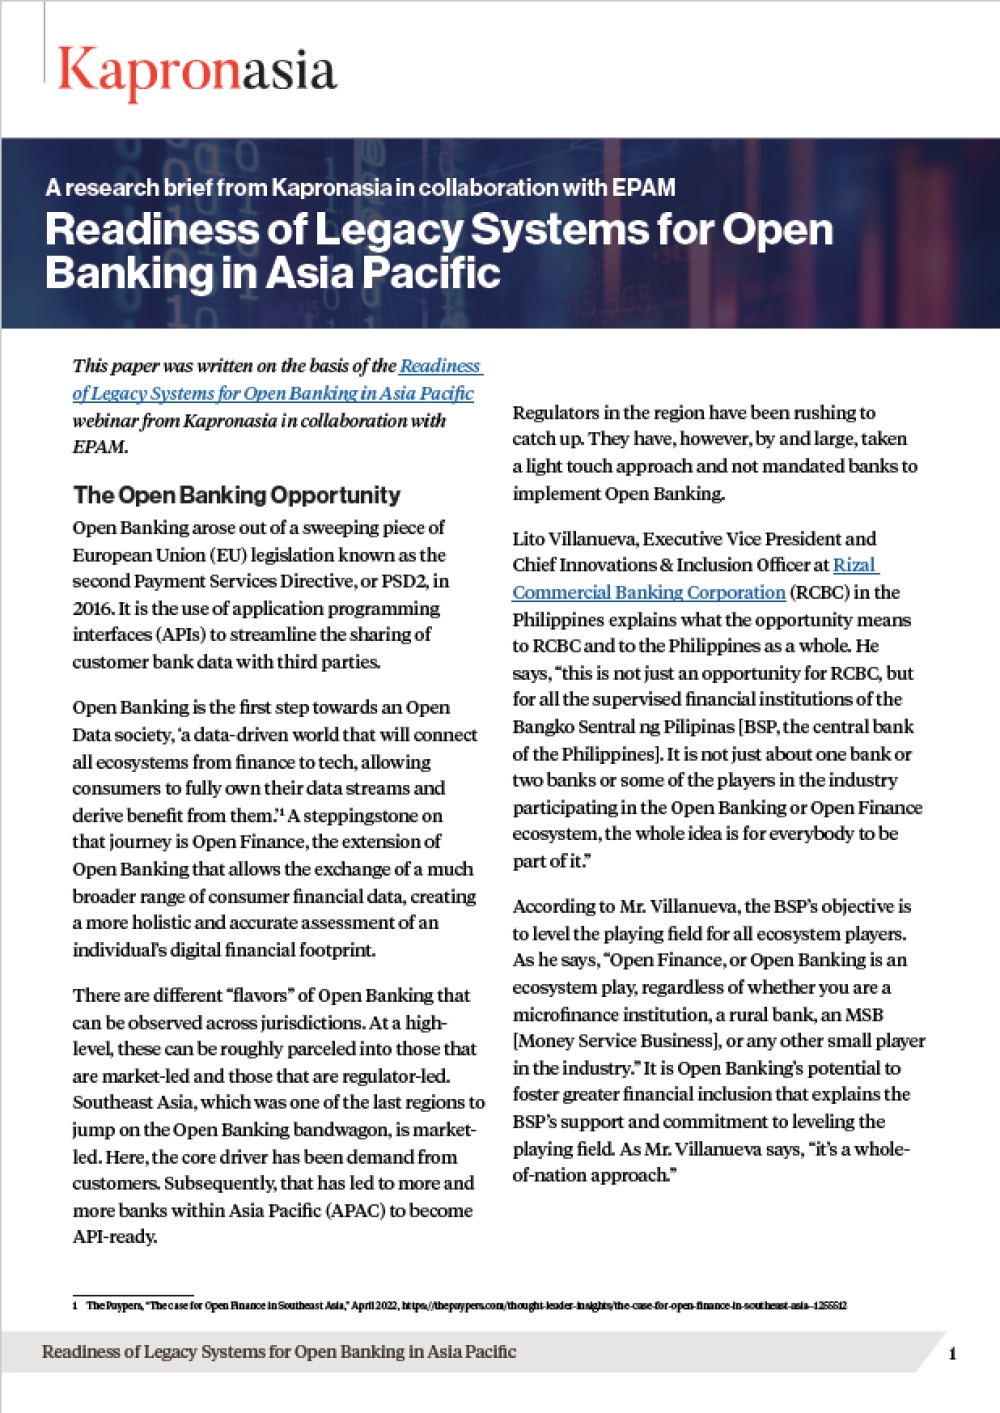 Readiness of Legacy Systems for Open Banking in Asia Pacific: A research brief from Kapronasia in collaboration with EPAM